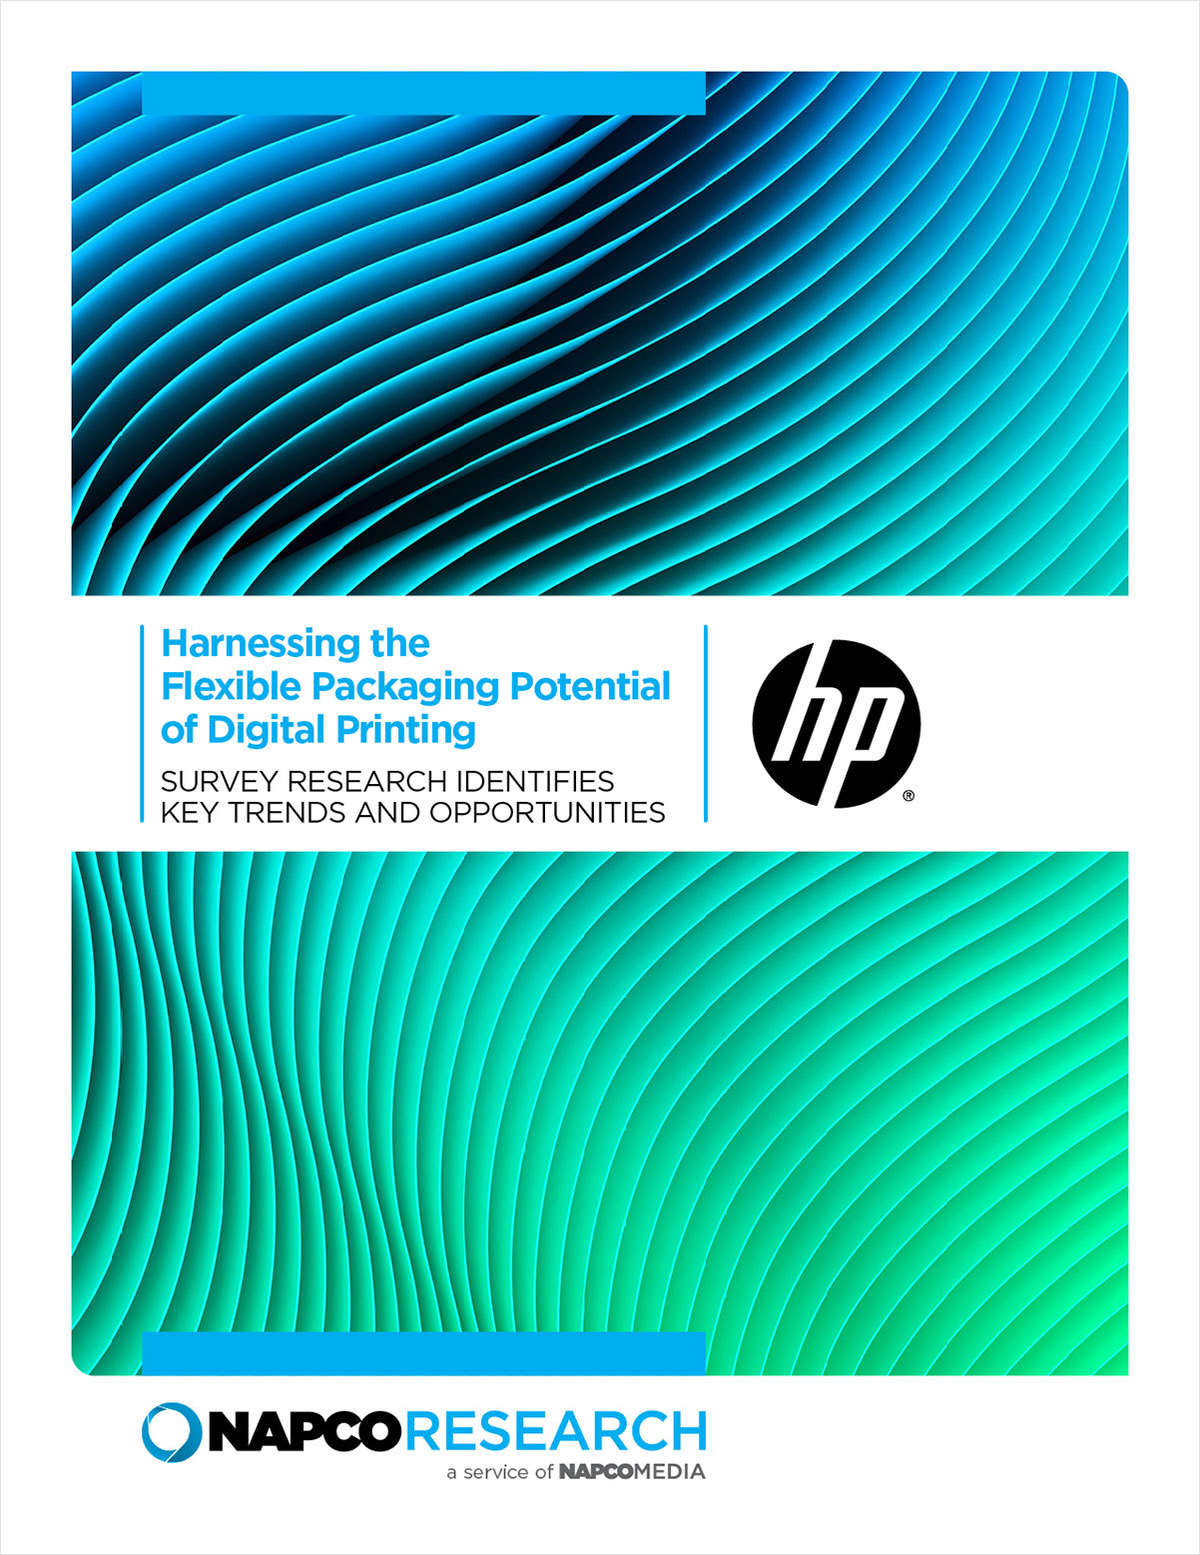 Harnessing the Flexible Packaging Potential of Digital Printing